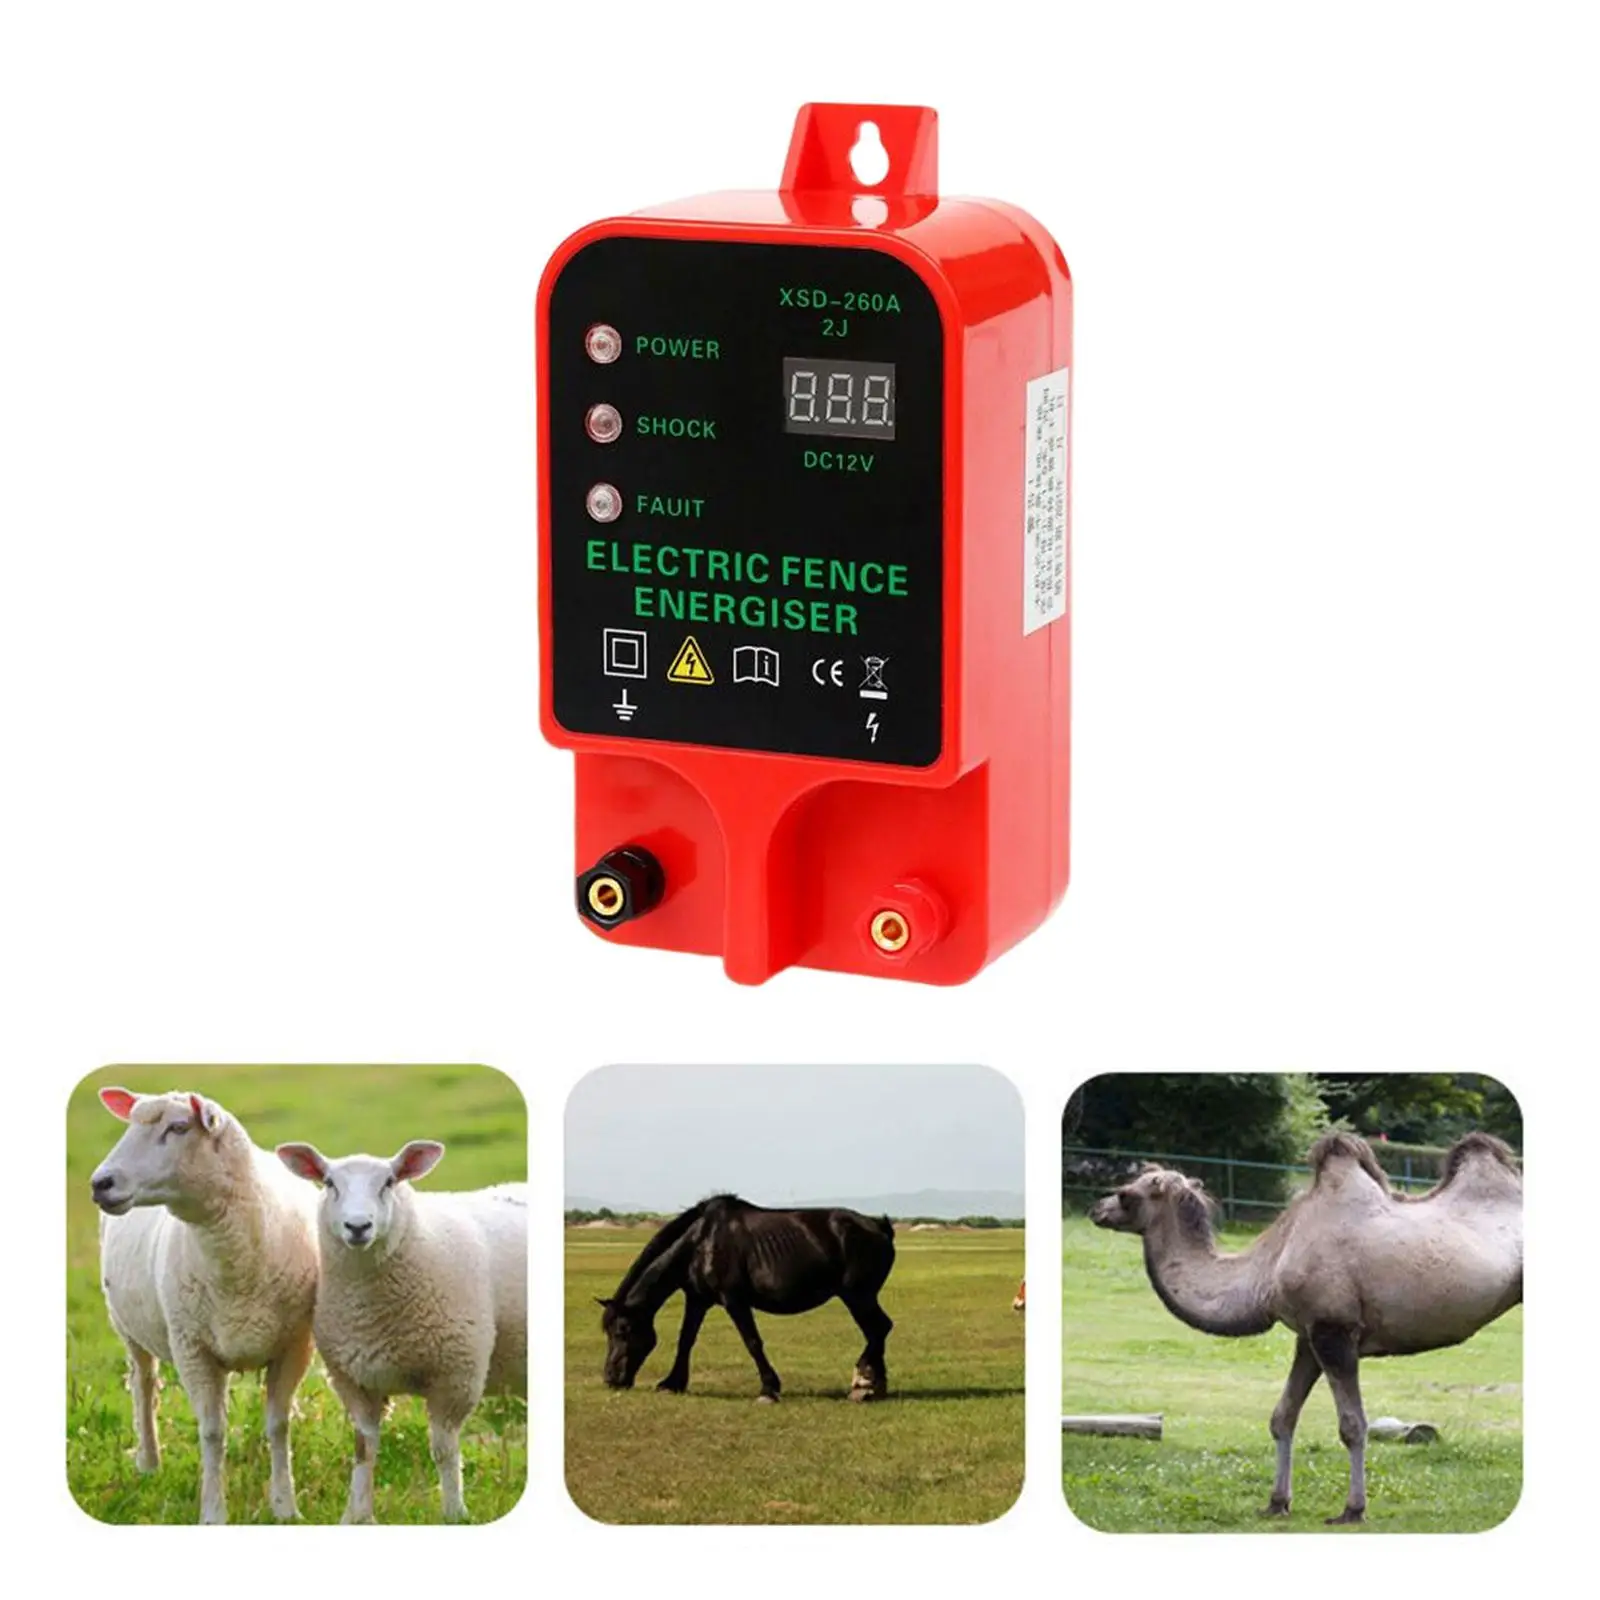 Xsd-260B Electric Fence Controller UK Adapter High Voltage Pulse Controller Prevent Beasts Waterproof Dog Poultry Fence for Farm